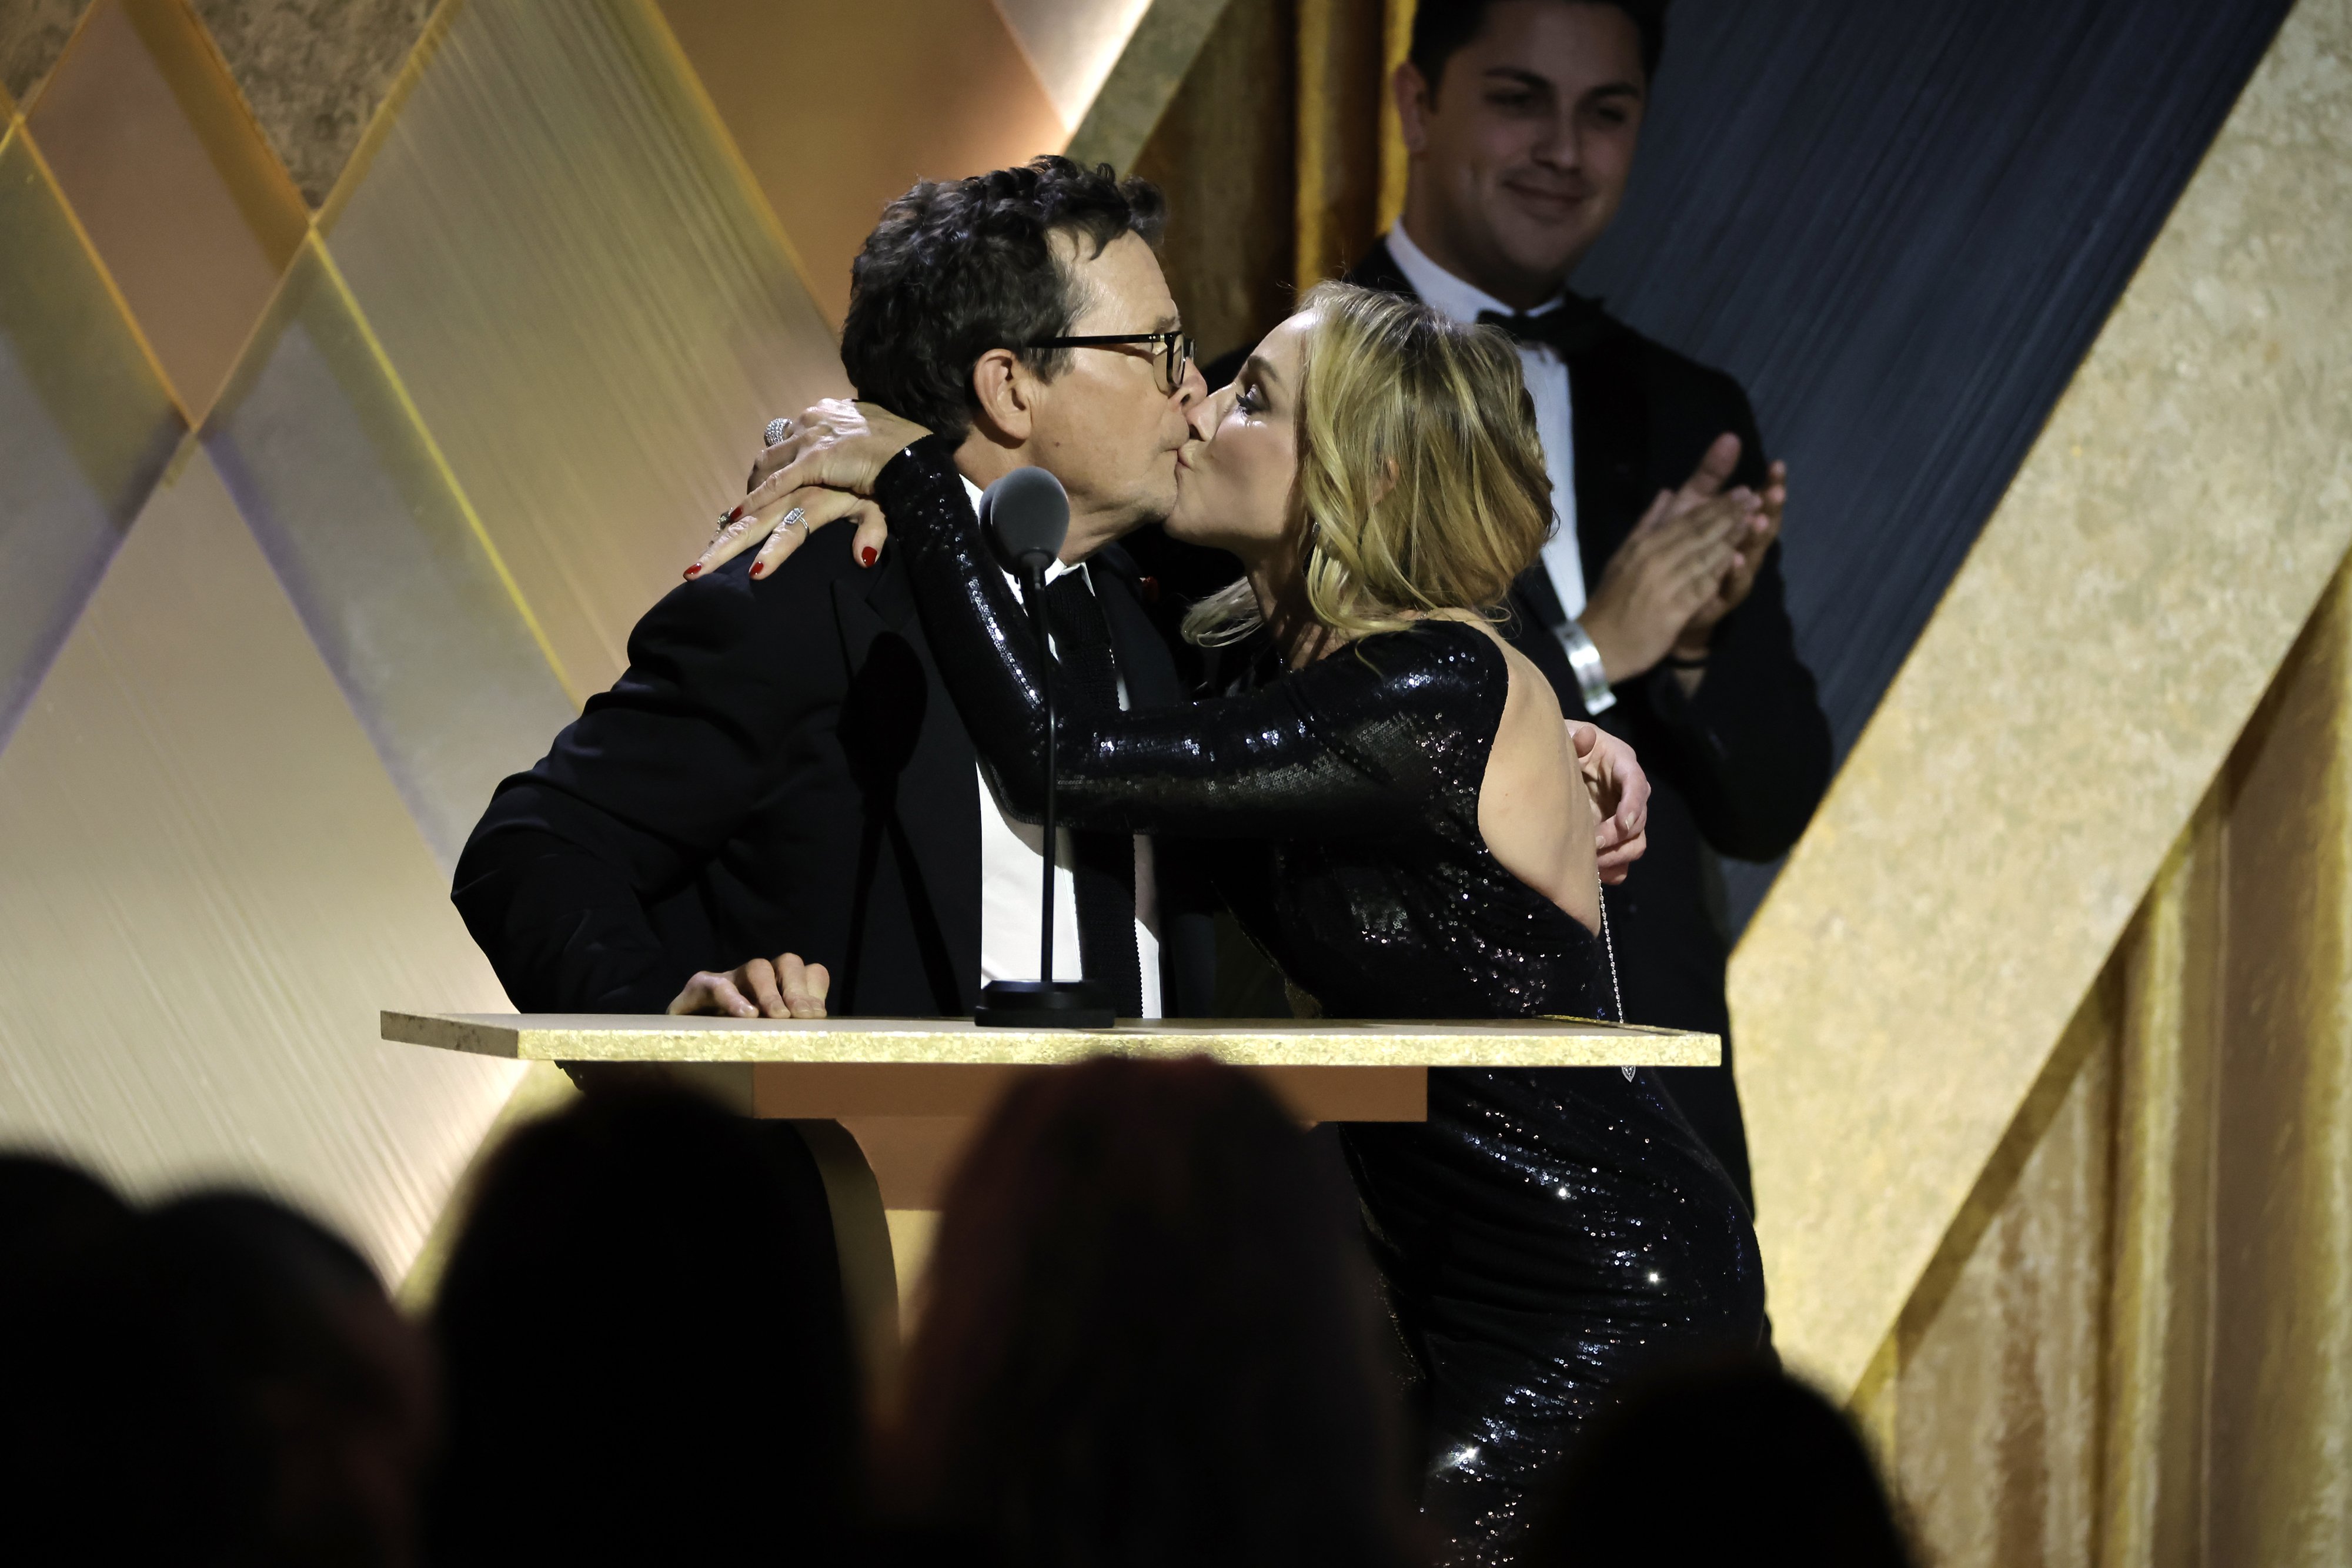 Michael J. Fox kisses his wife, Tracy Pollan onstage during the Academy of Motion Picture Arts and Sciences 13th Governors Awards at Fairmont Century Plaza on November 19, 2022, in Los Angeles, California. | Source: Getty Images